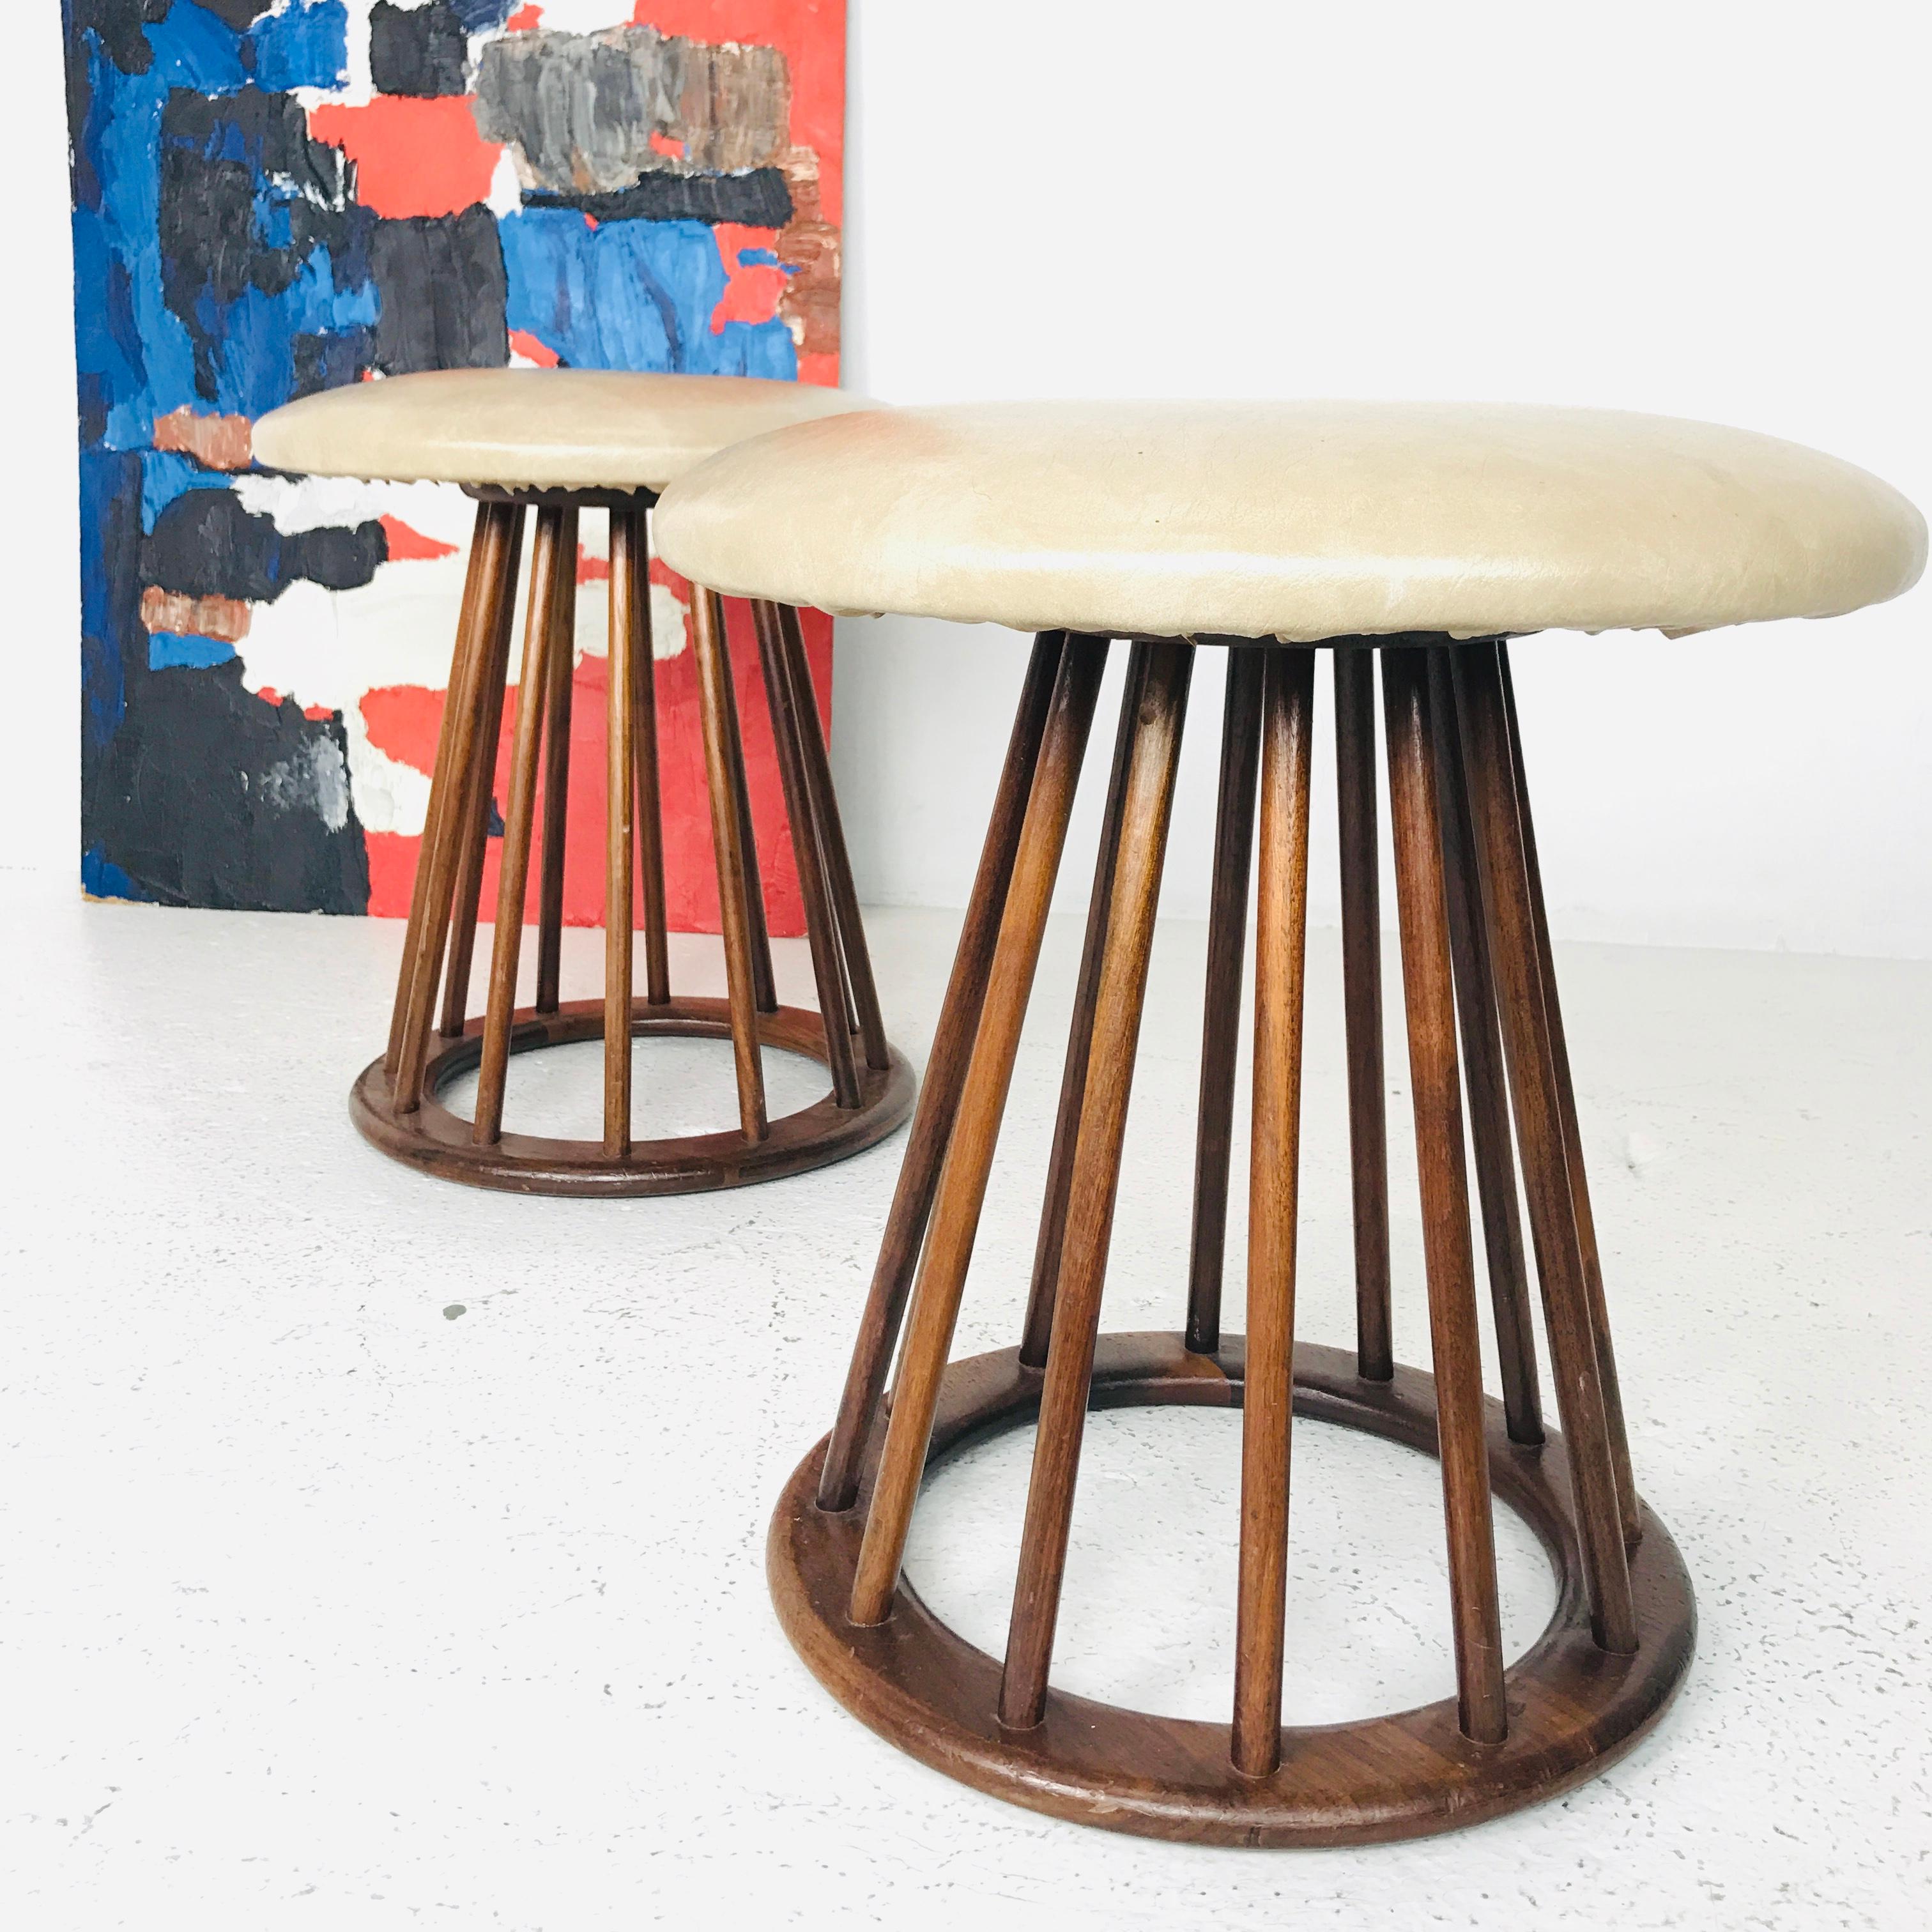 Pair of Arthur Umanoff MCM spindle stools. Stools have original vinyl upholstery and recommend new upholstery and refinishing, circa 1960s

Dimensions:
17dia x 16t.